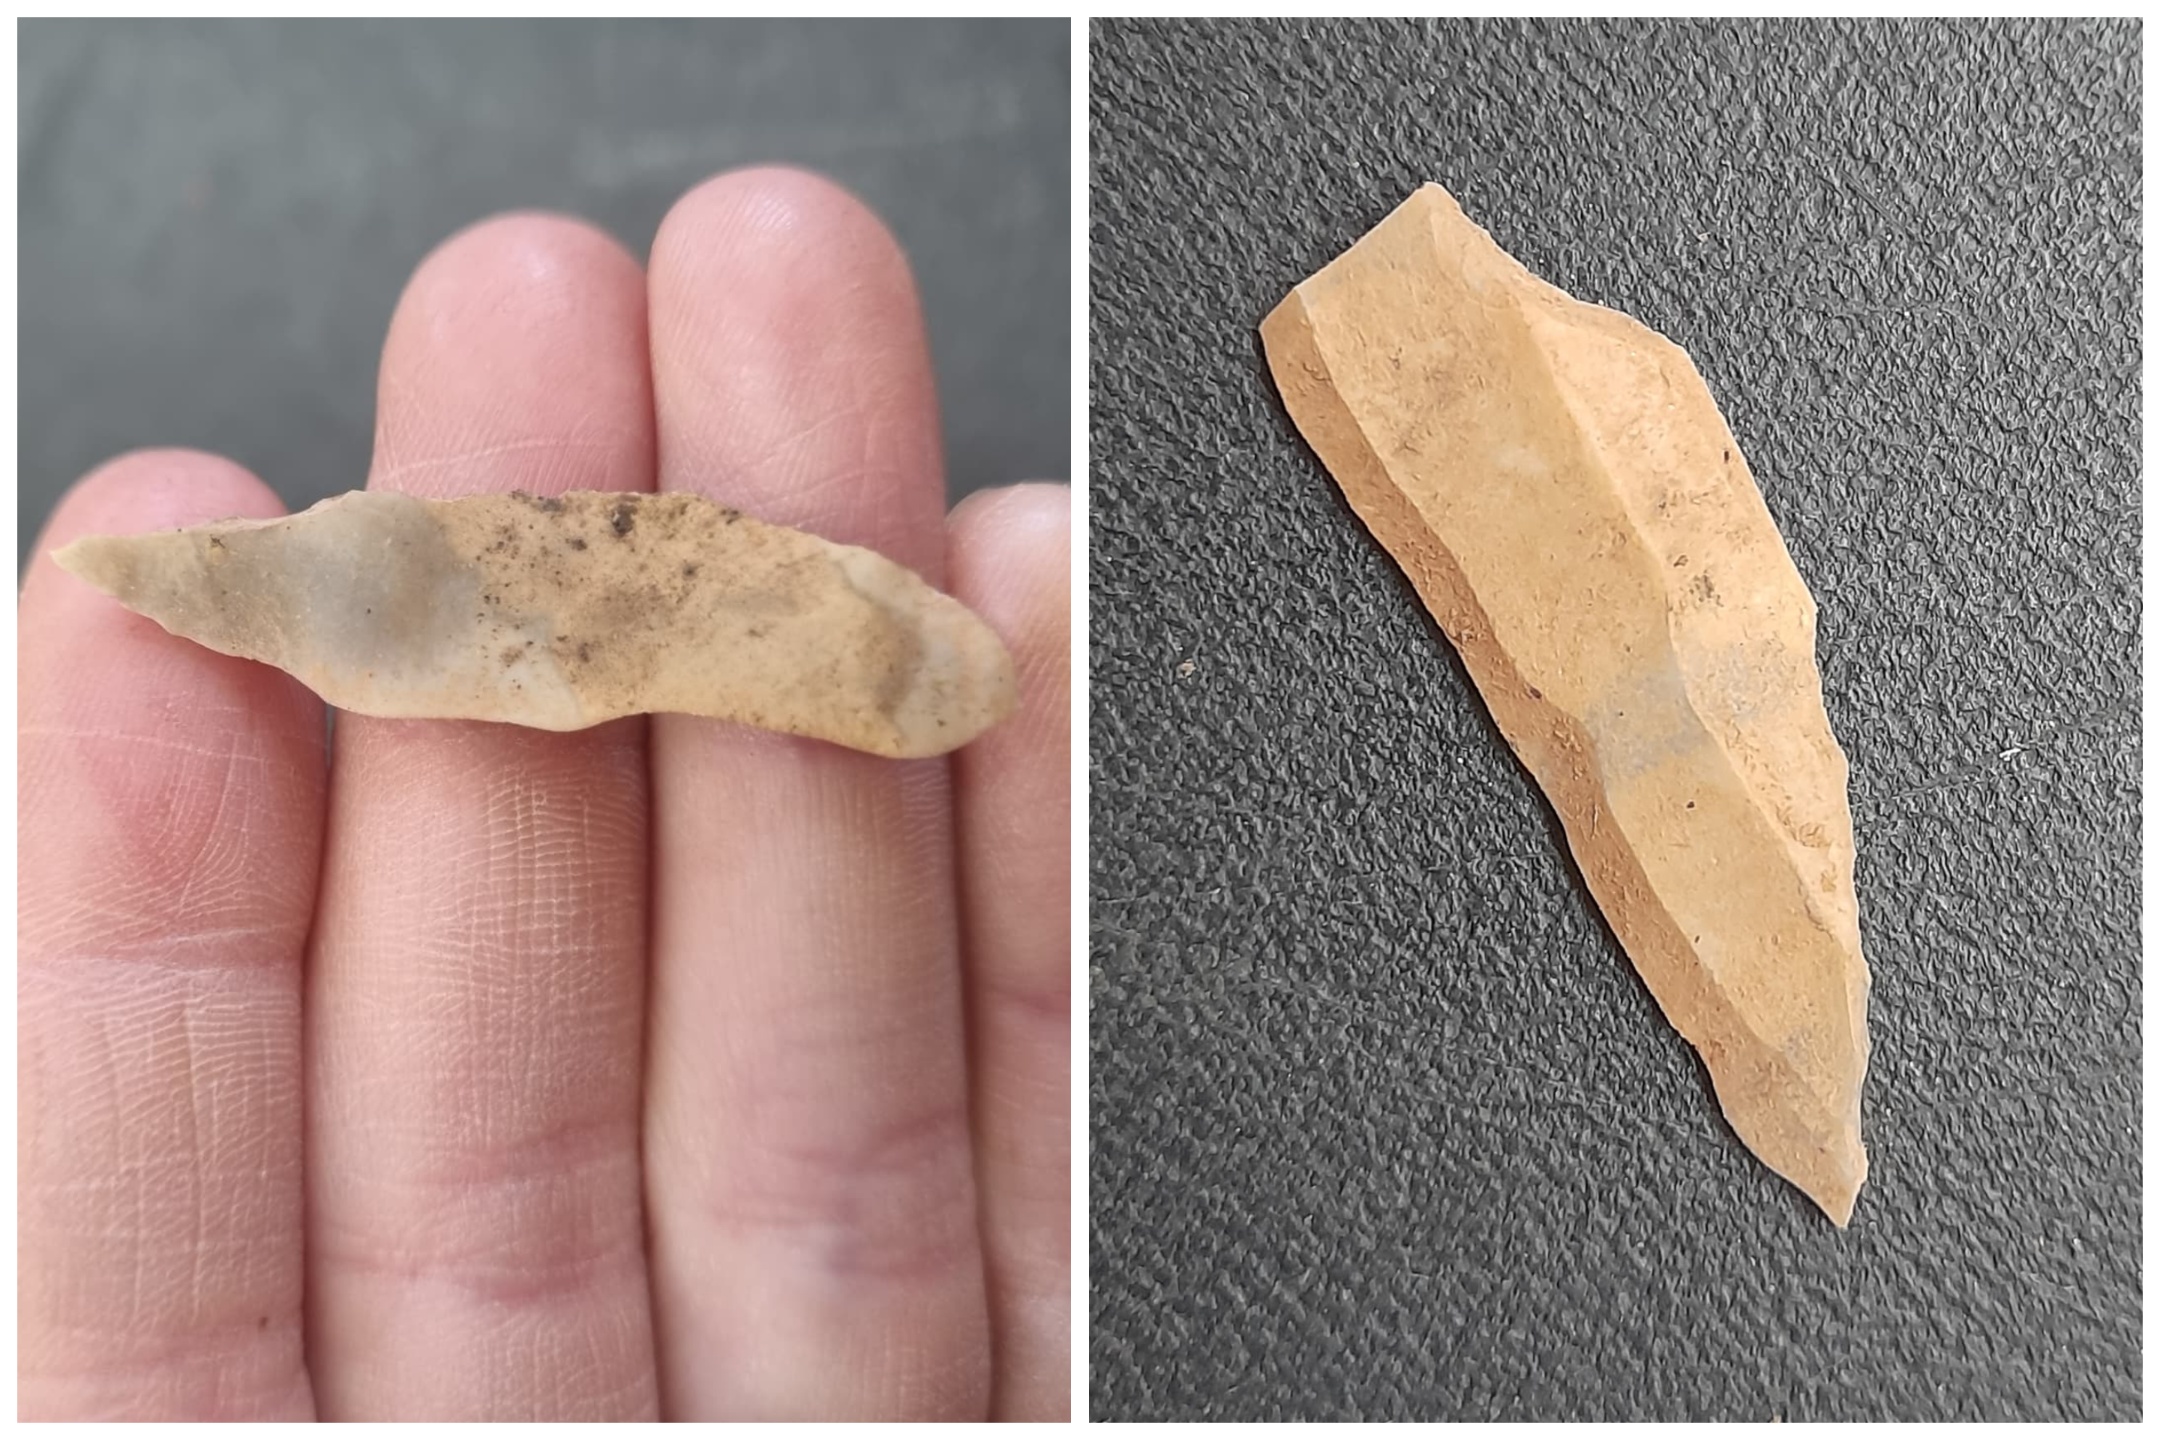 “Truly significant” paleolithic artifacts discovered during highway works